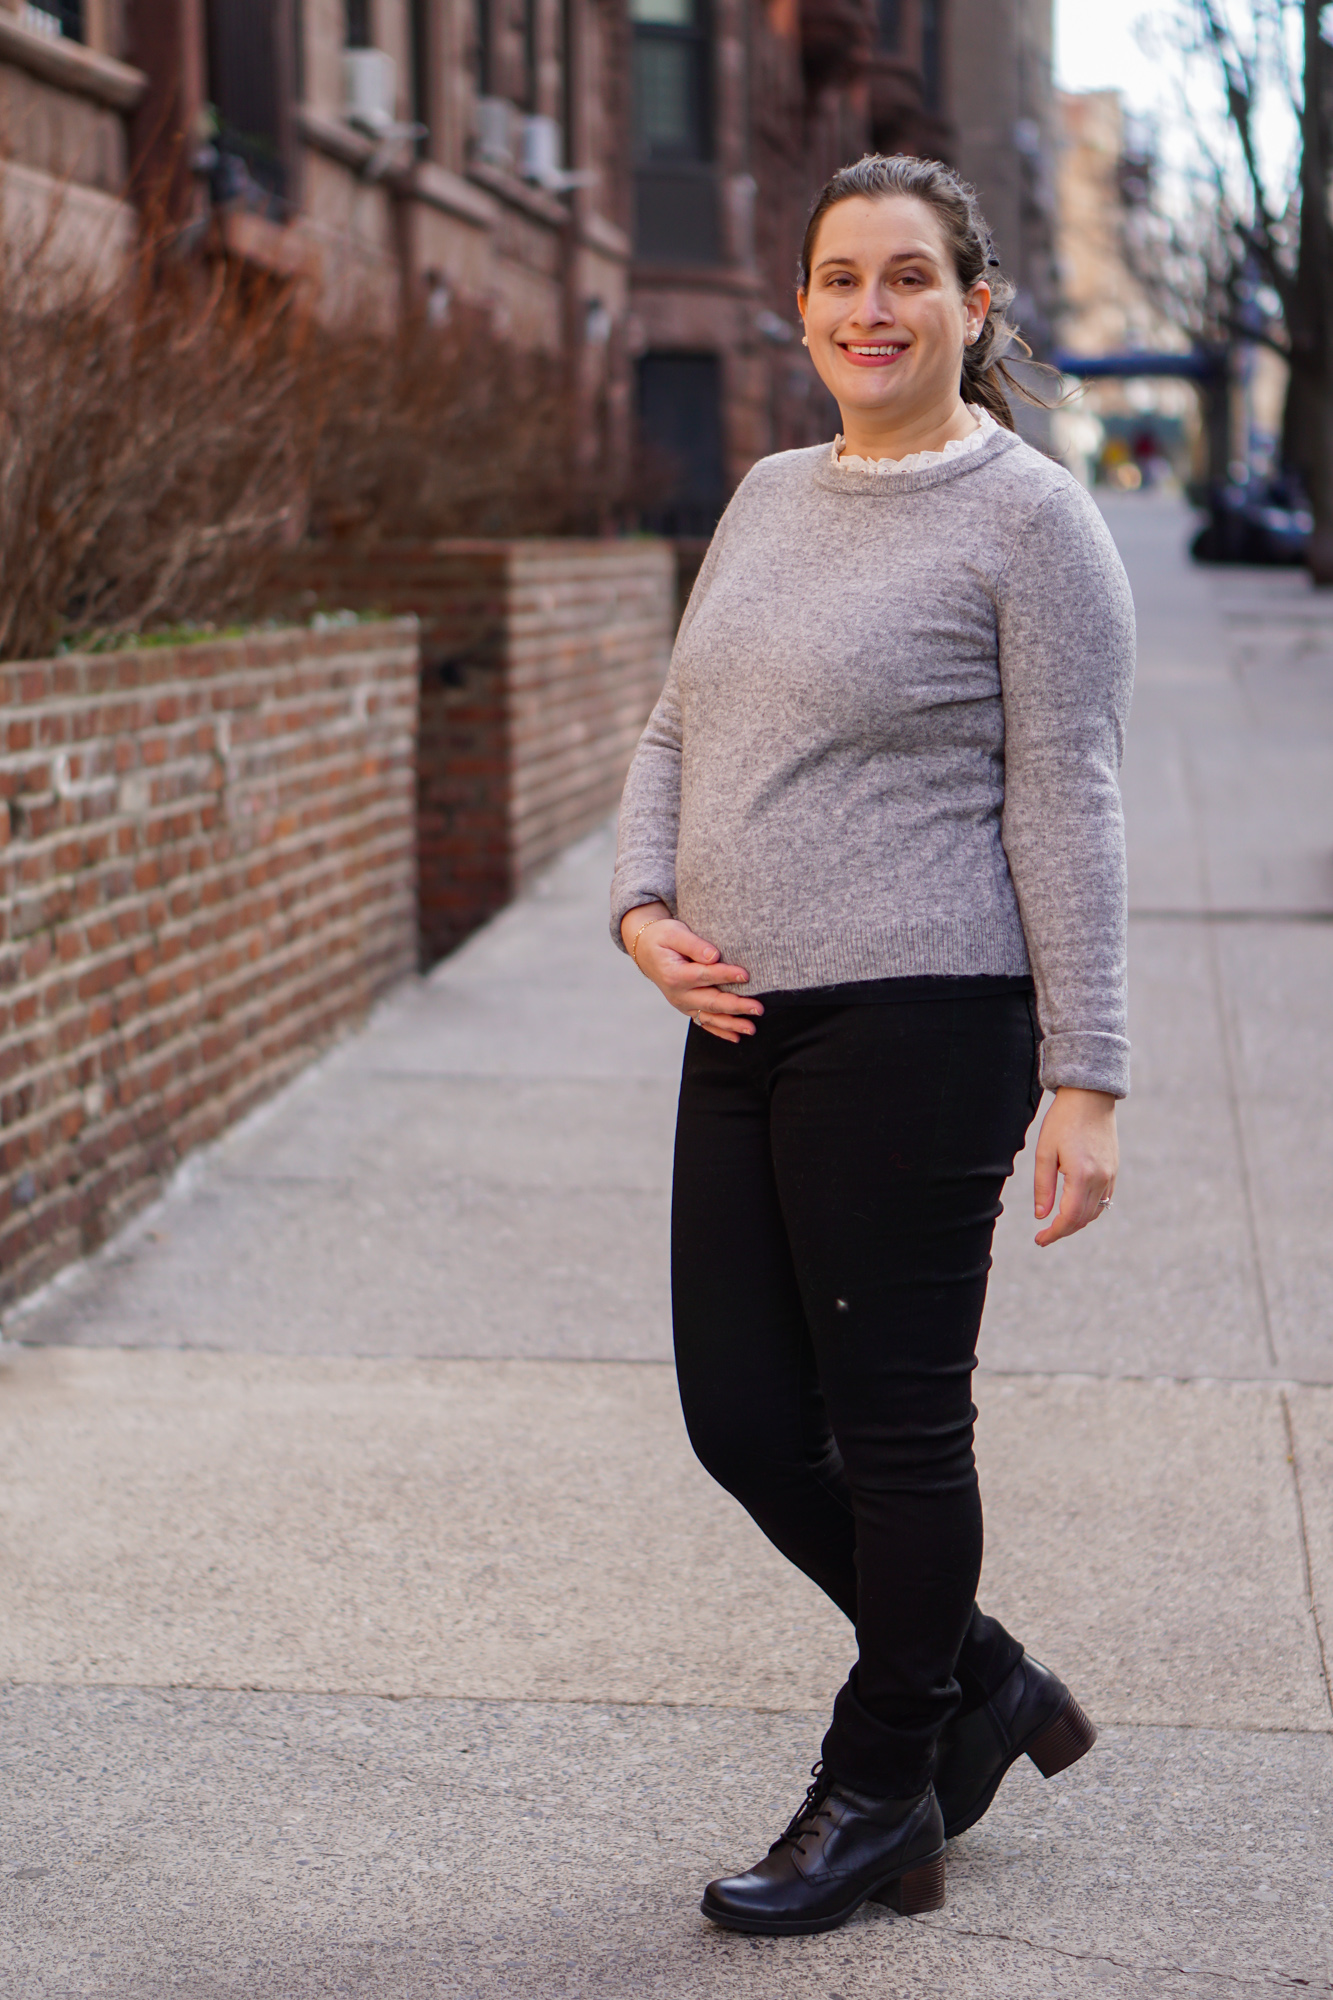 How to style maternity jeans